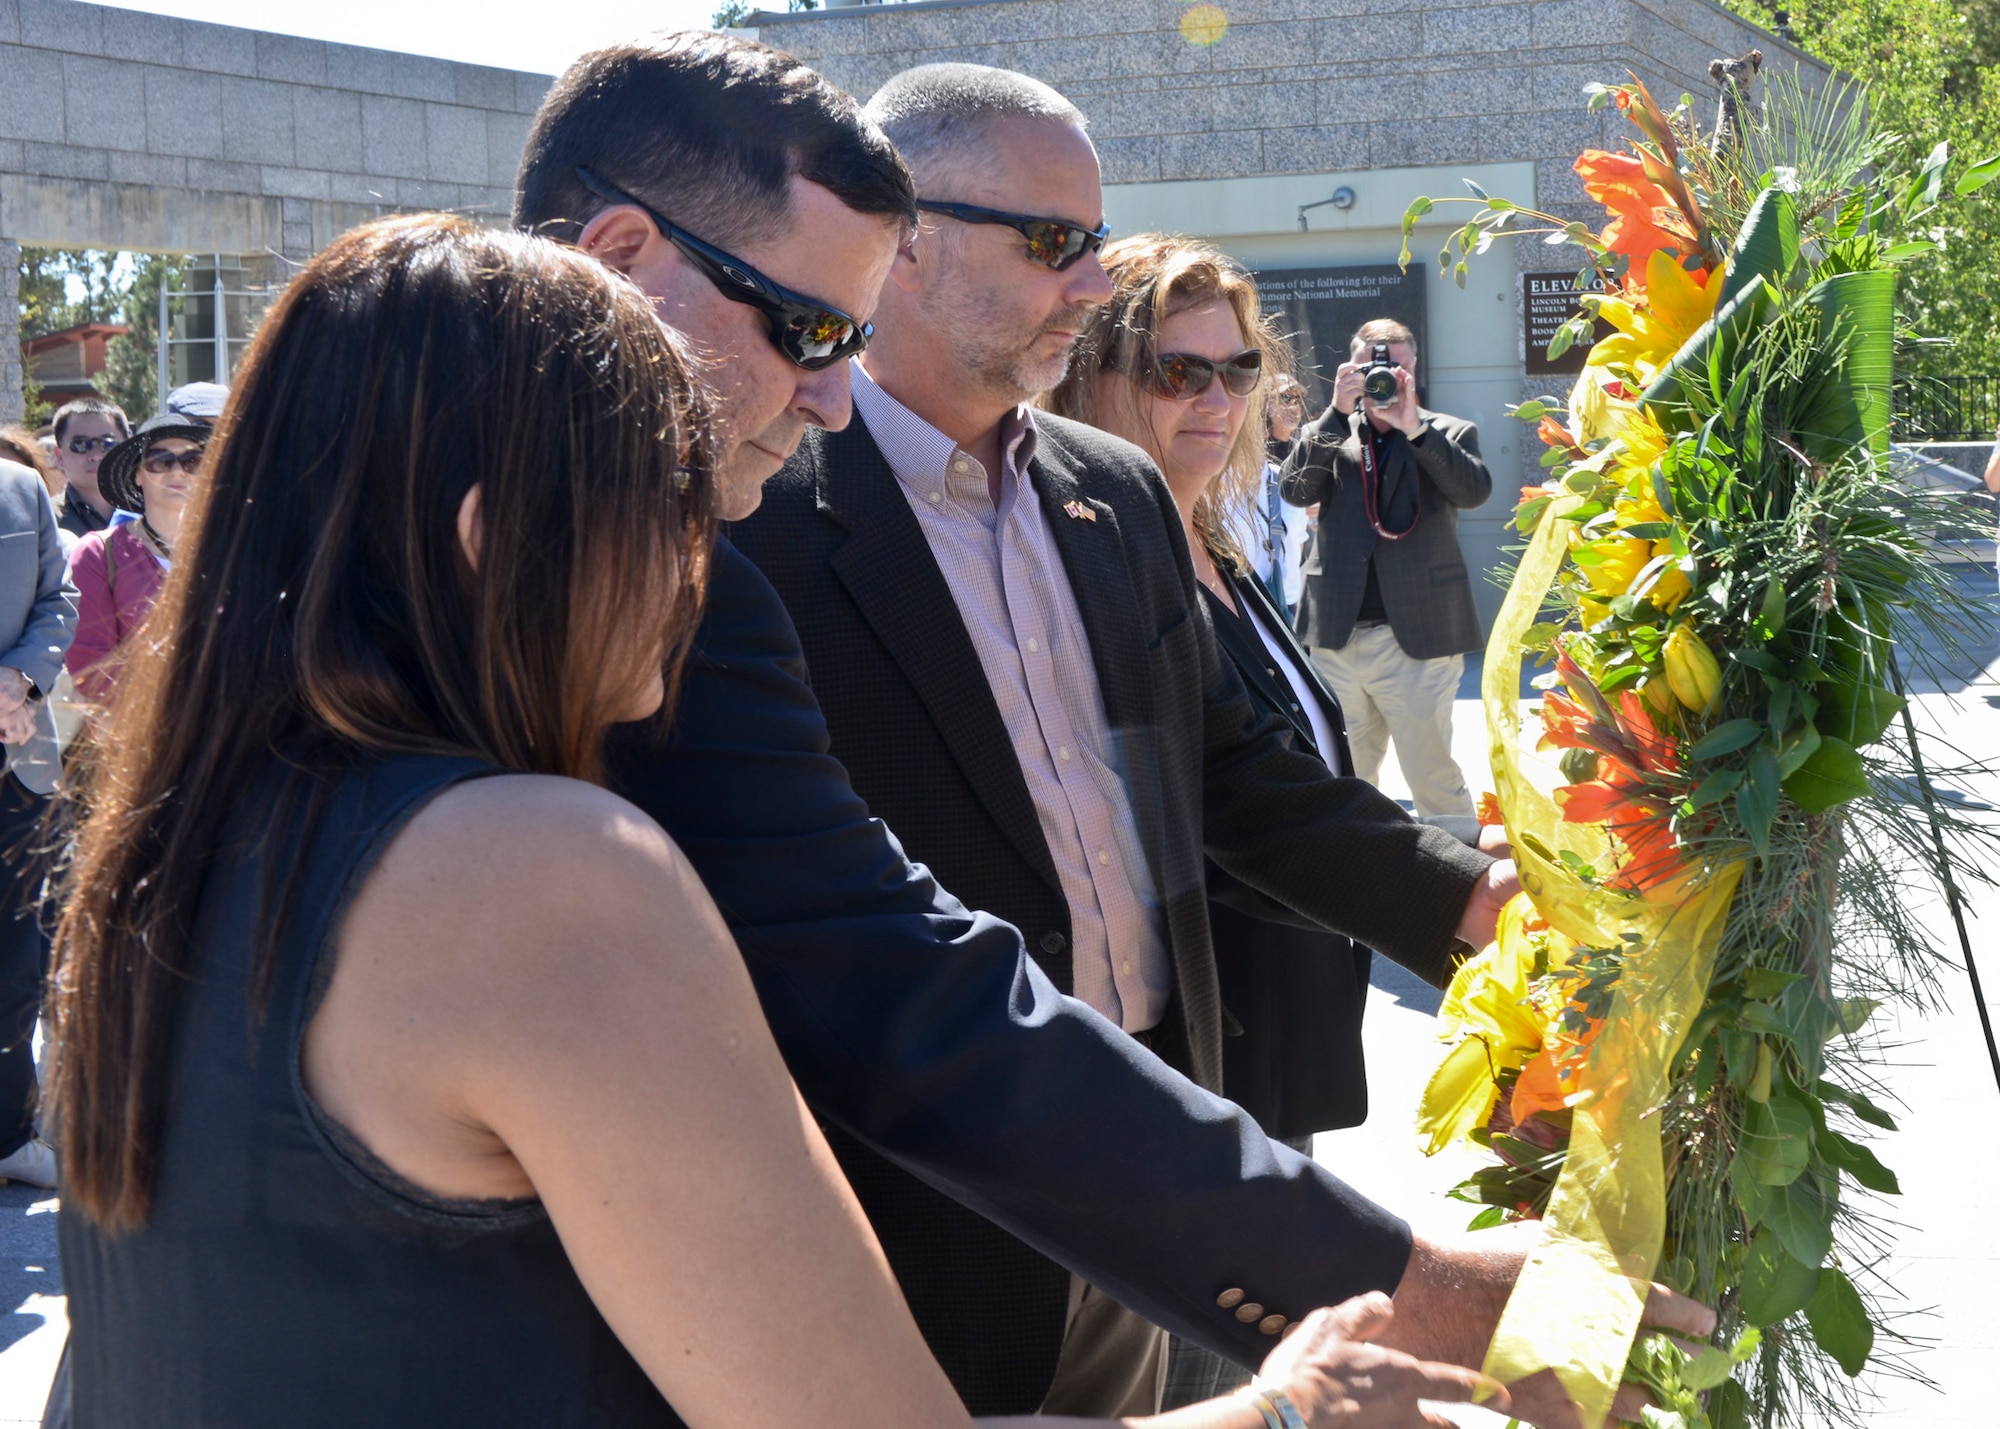 Senior foreign and U.S. attachés lay a wreath at the Mount Rushmore National Memorial, S.D., Sept. 11, 2016, on behalf of the Foreign Defense Attaché Corps. The wreath laying ceremony was conducted in honor of the 15th anniversary of the attacks on Sept. 11, 2001, that occurred in New York, Virginia and Pennsylvania. (U.S. Air Force photo by Senior Airman Anania Tekurio)